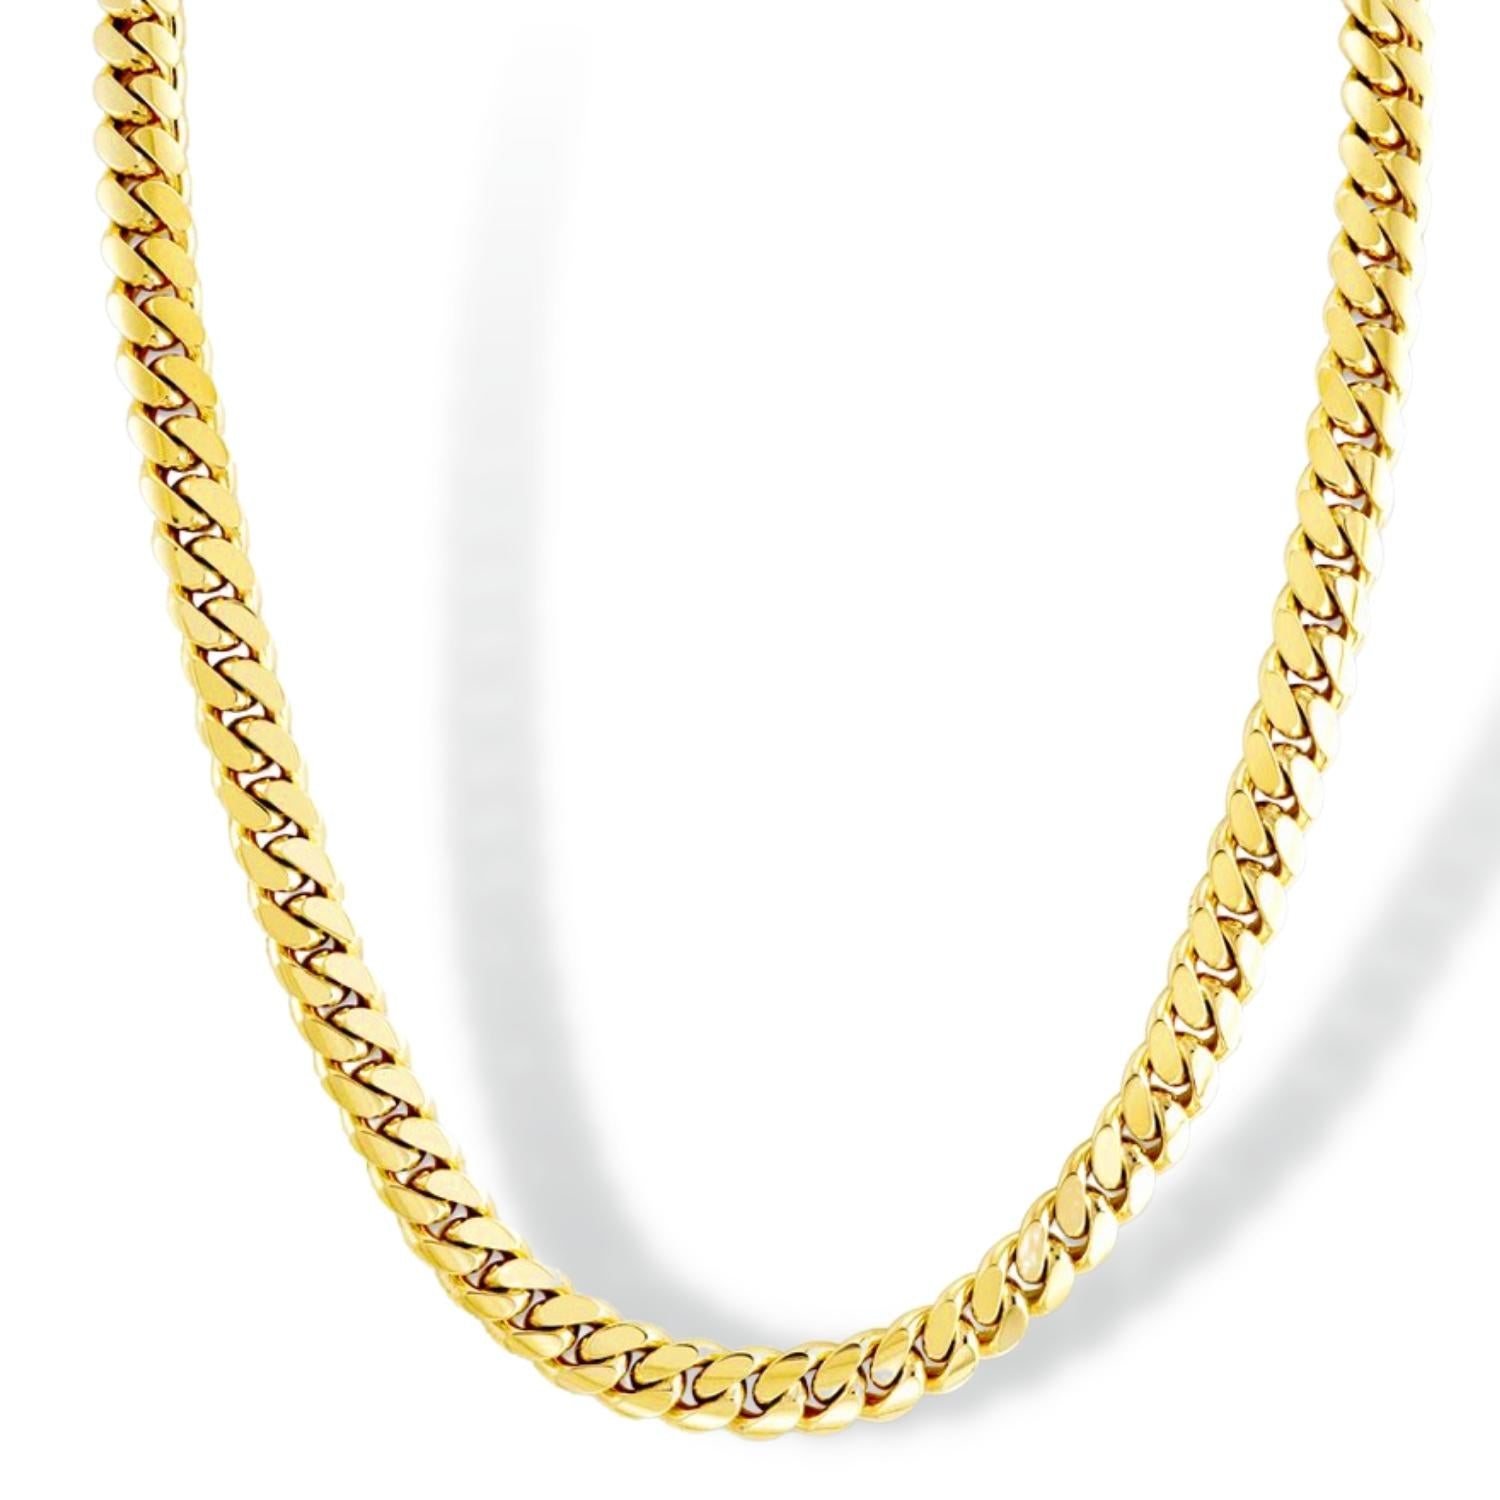 Solid Yellow Gold Miami Cuban Chain 9.5mm Width